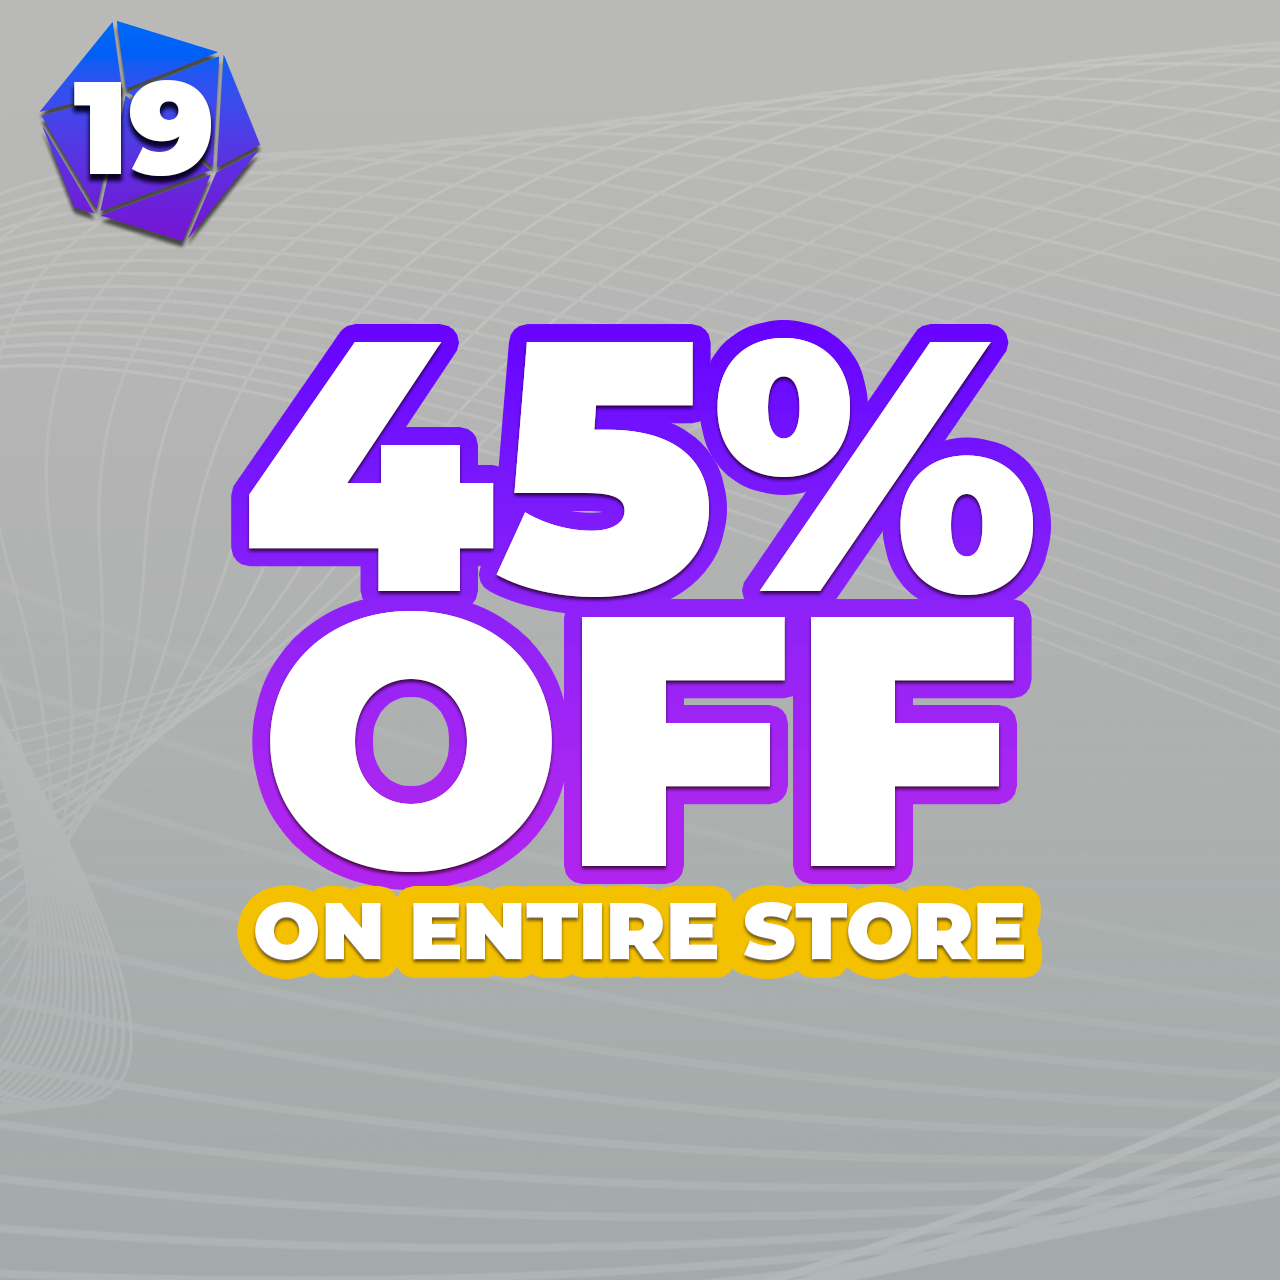 45% off on the entire store